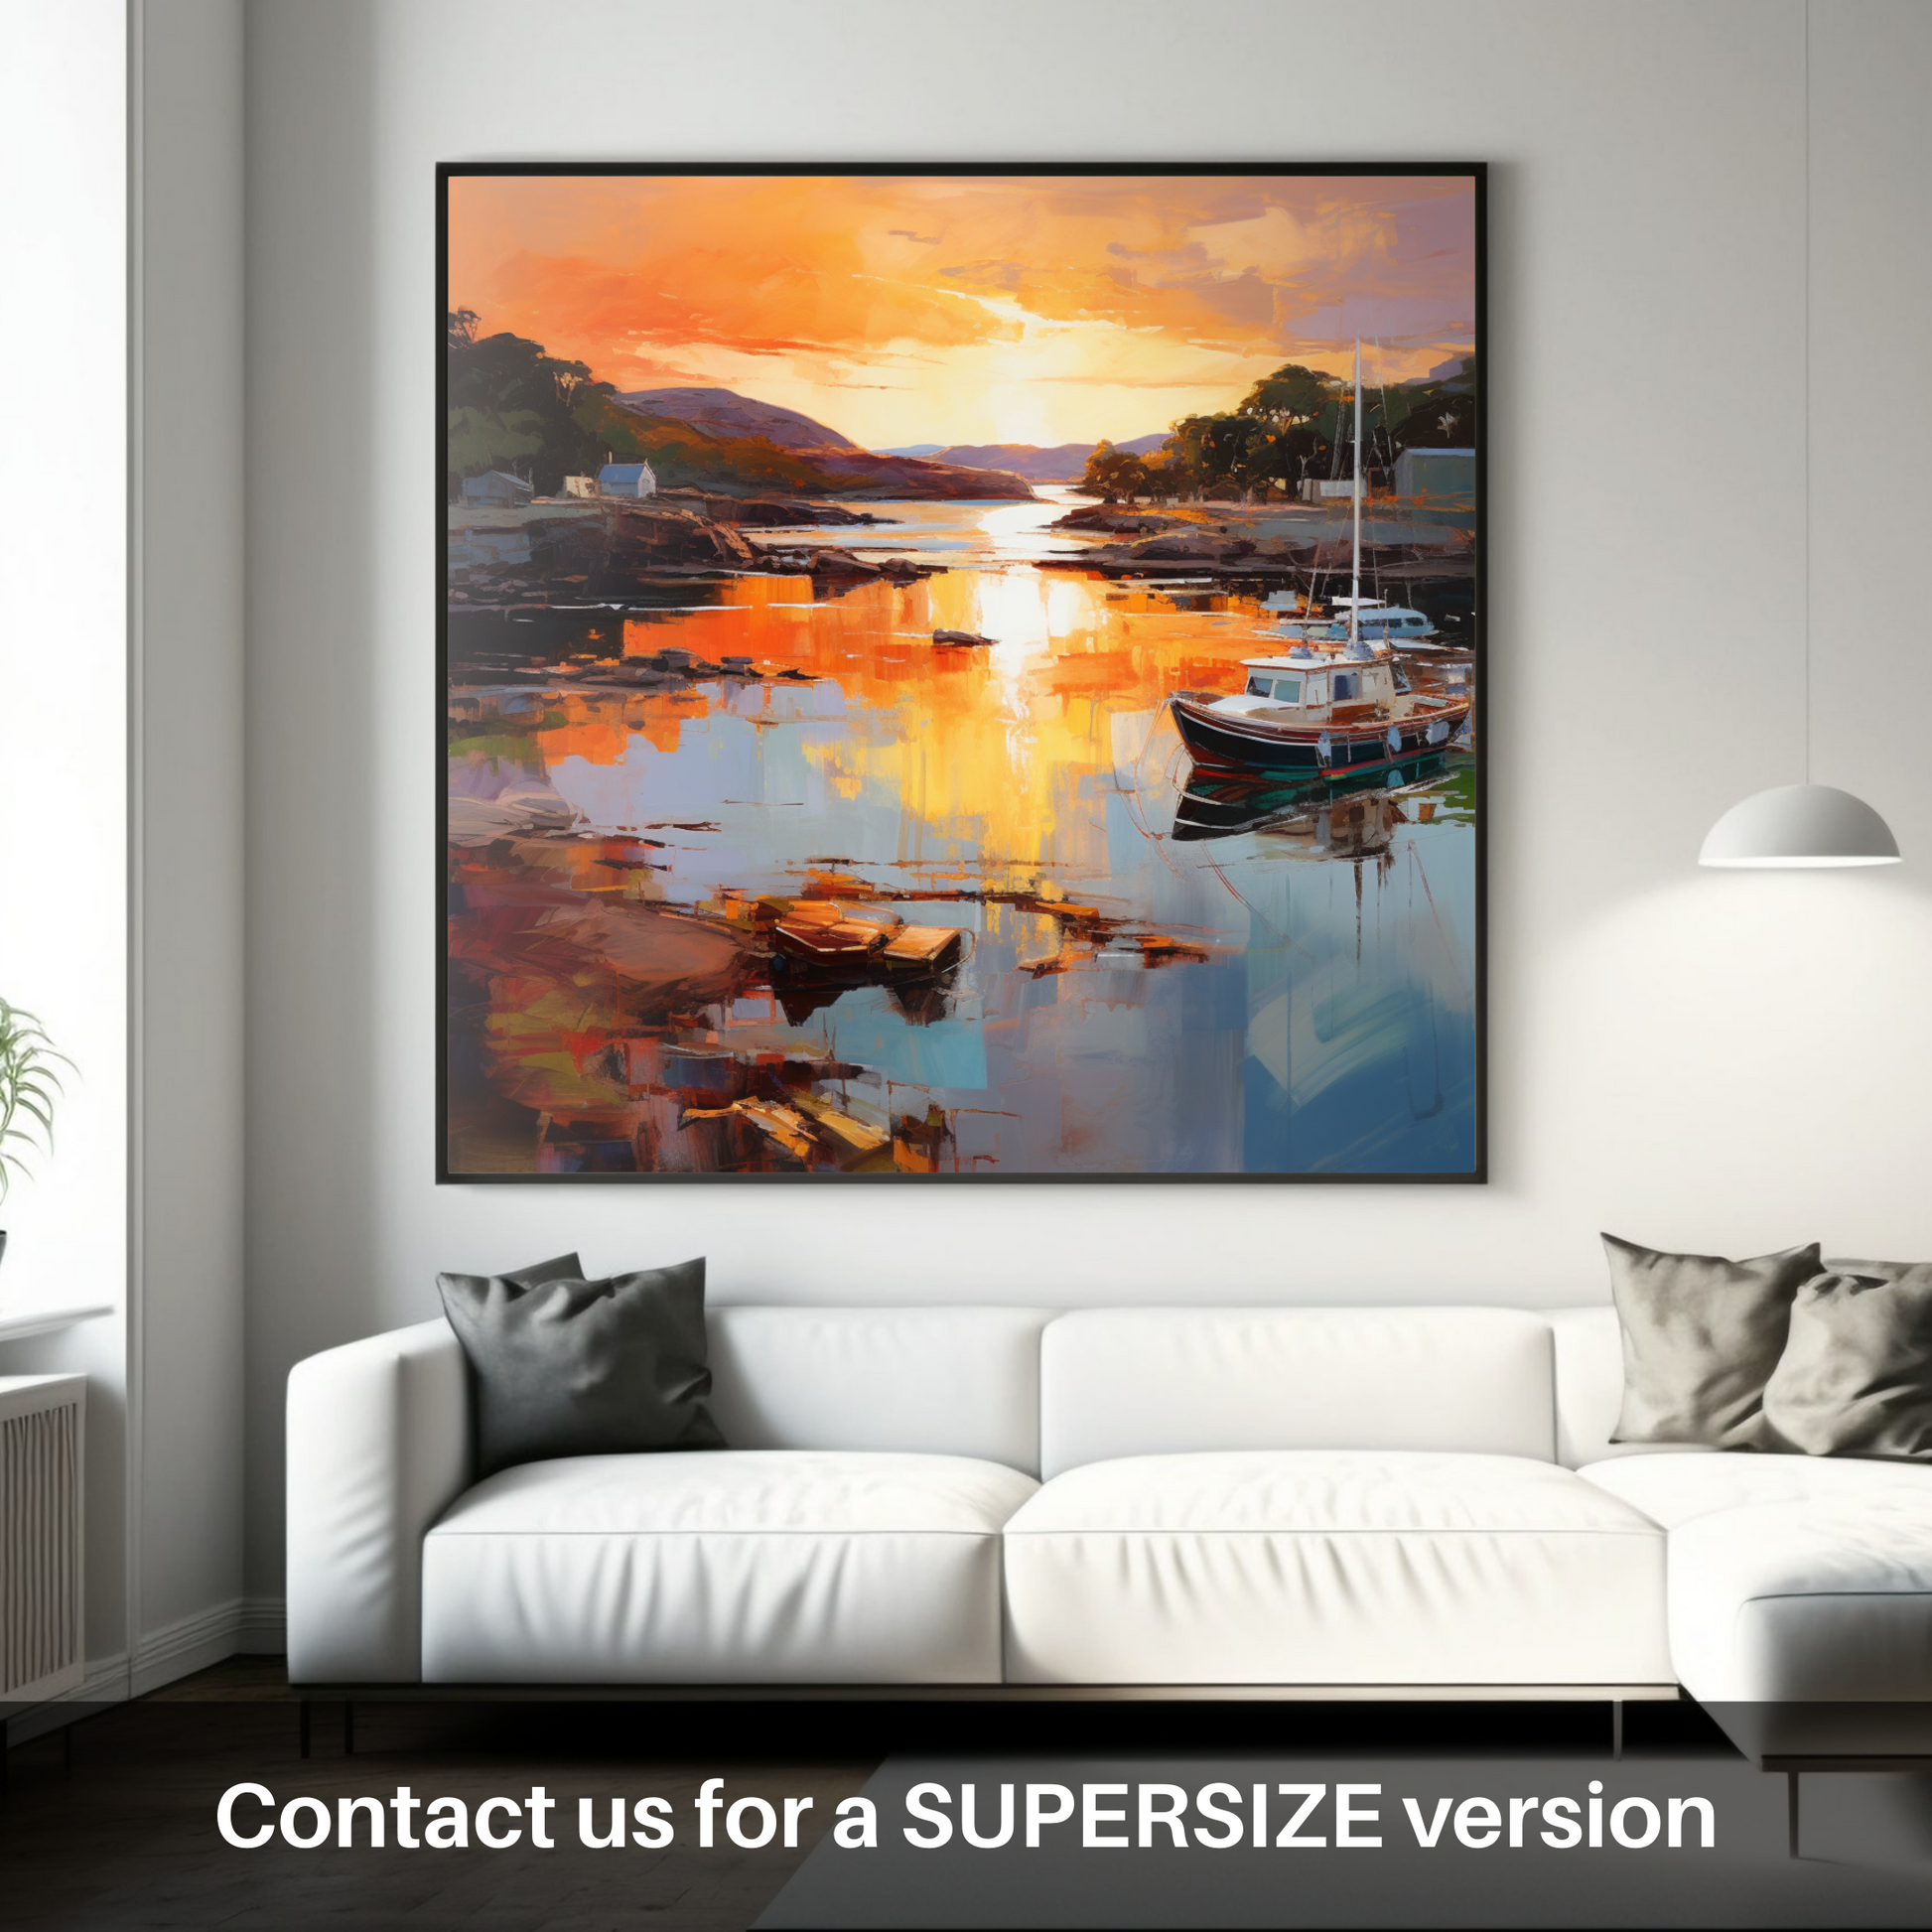 Huge supersize print of Isleornsay Harbour at sunset